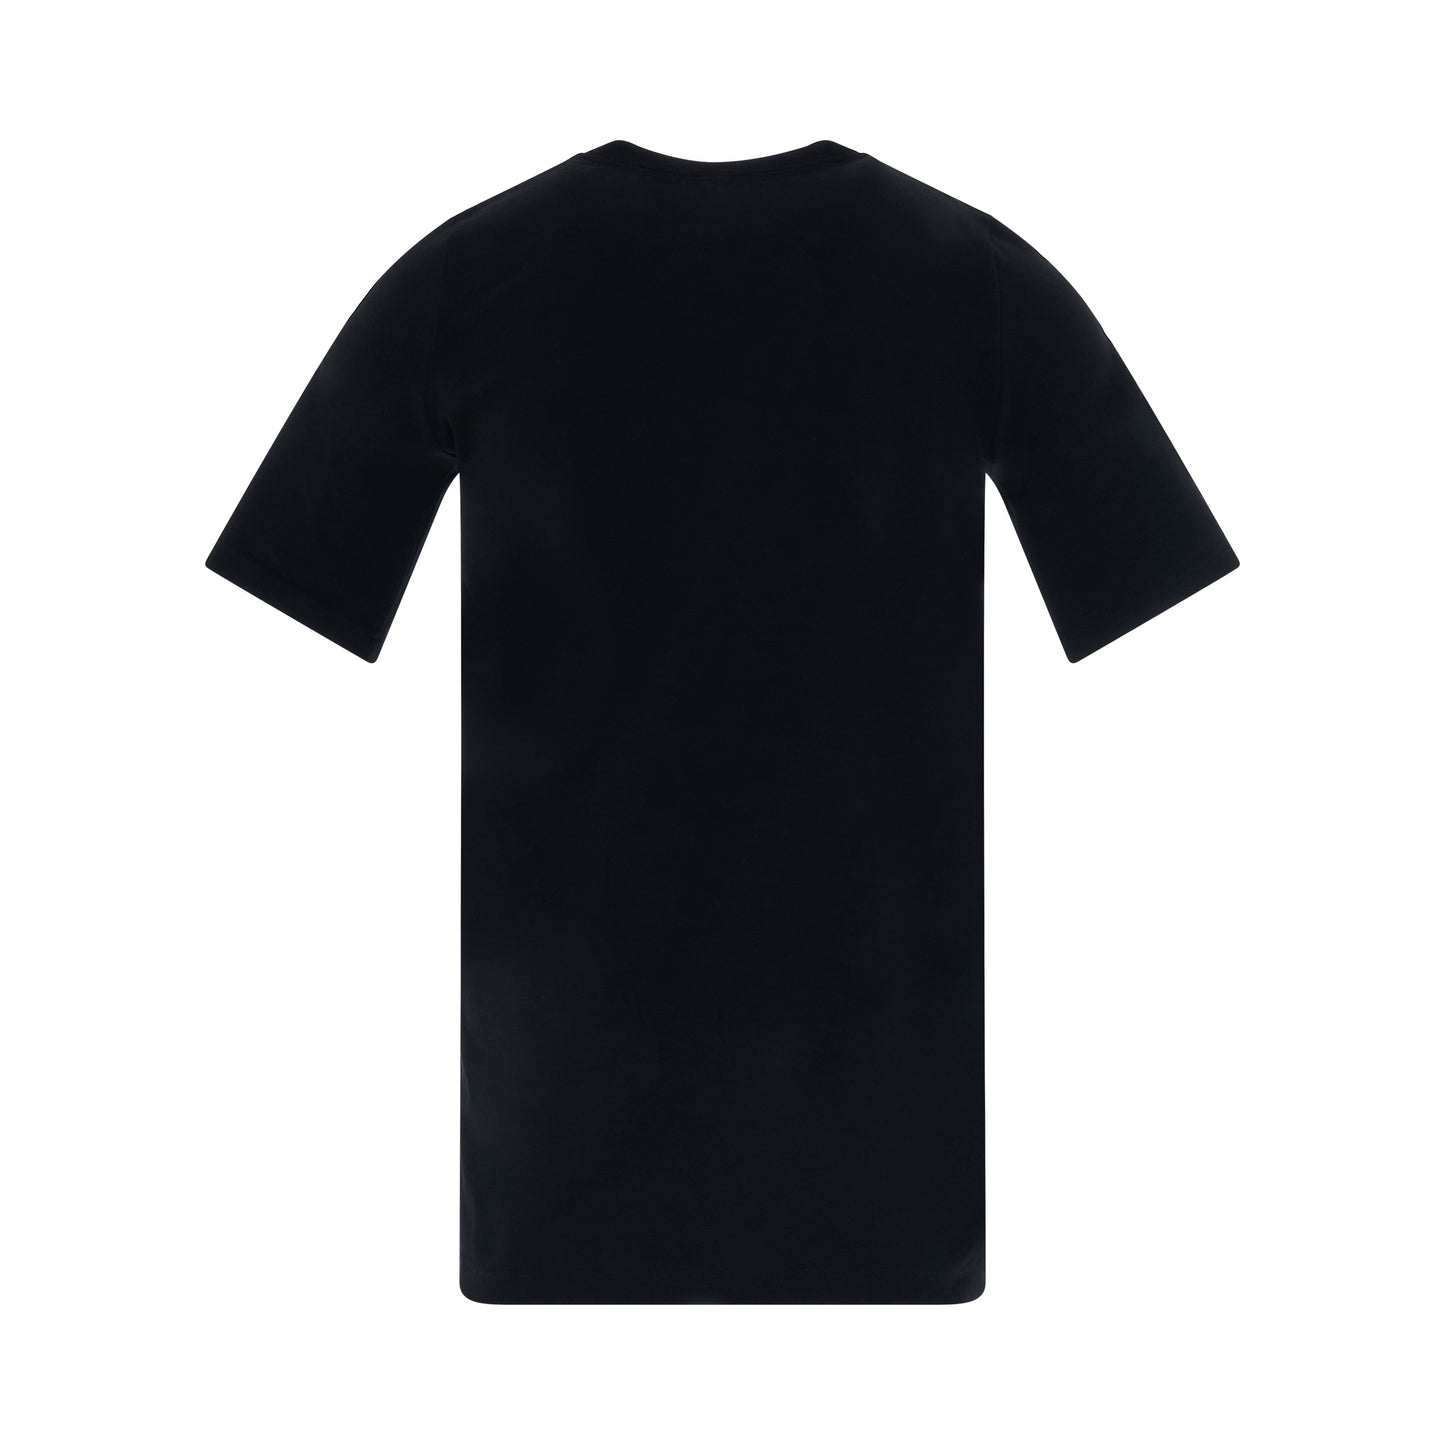 Stretching Tape T-Shirt in Black